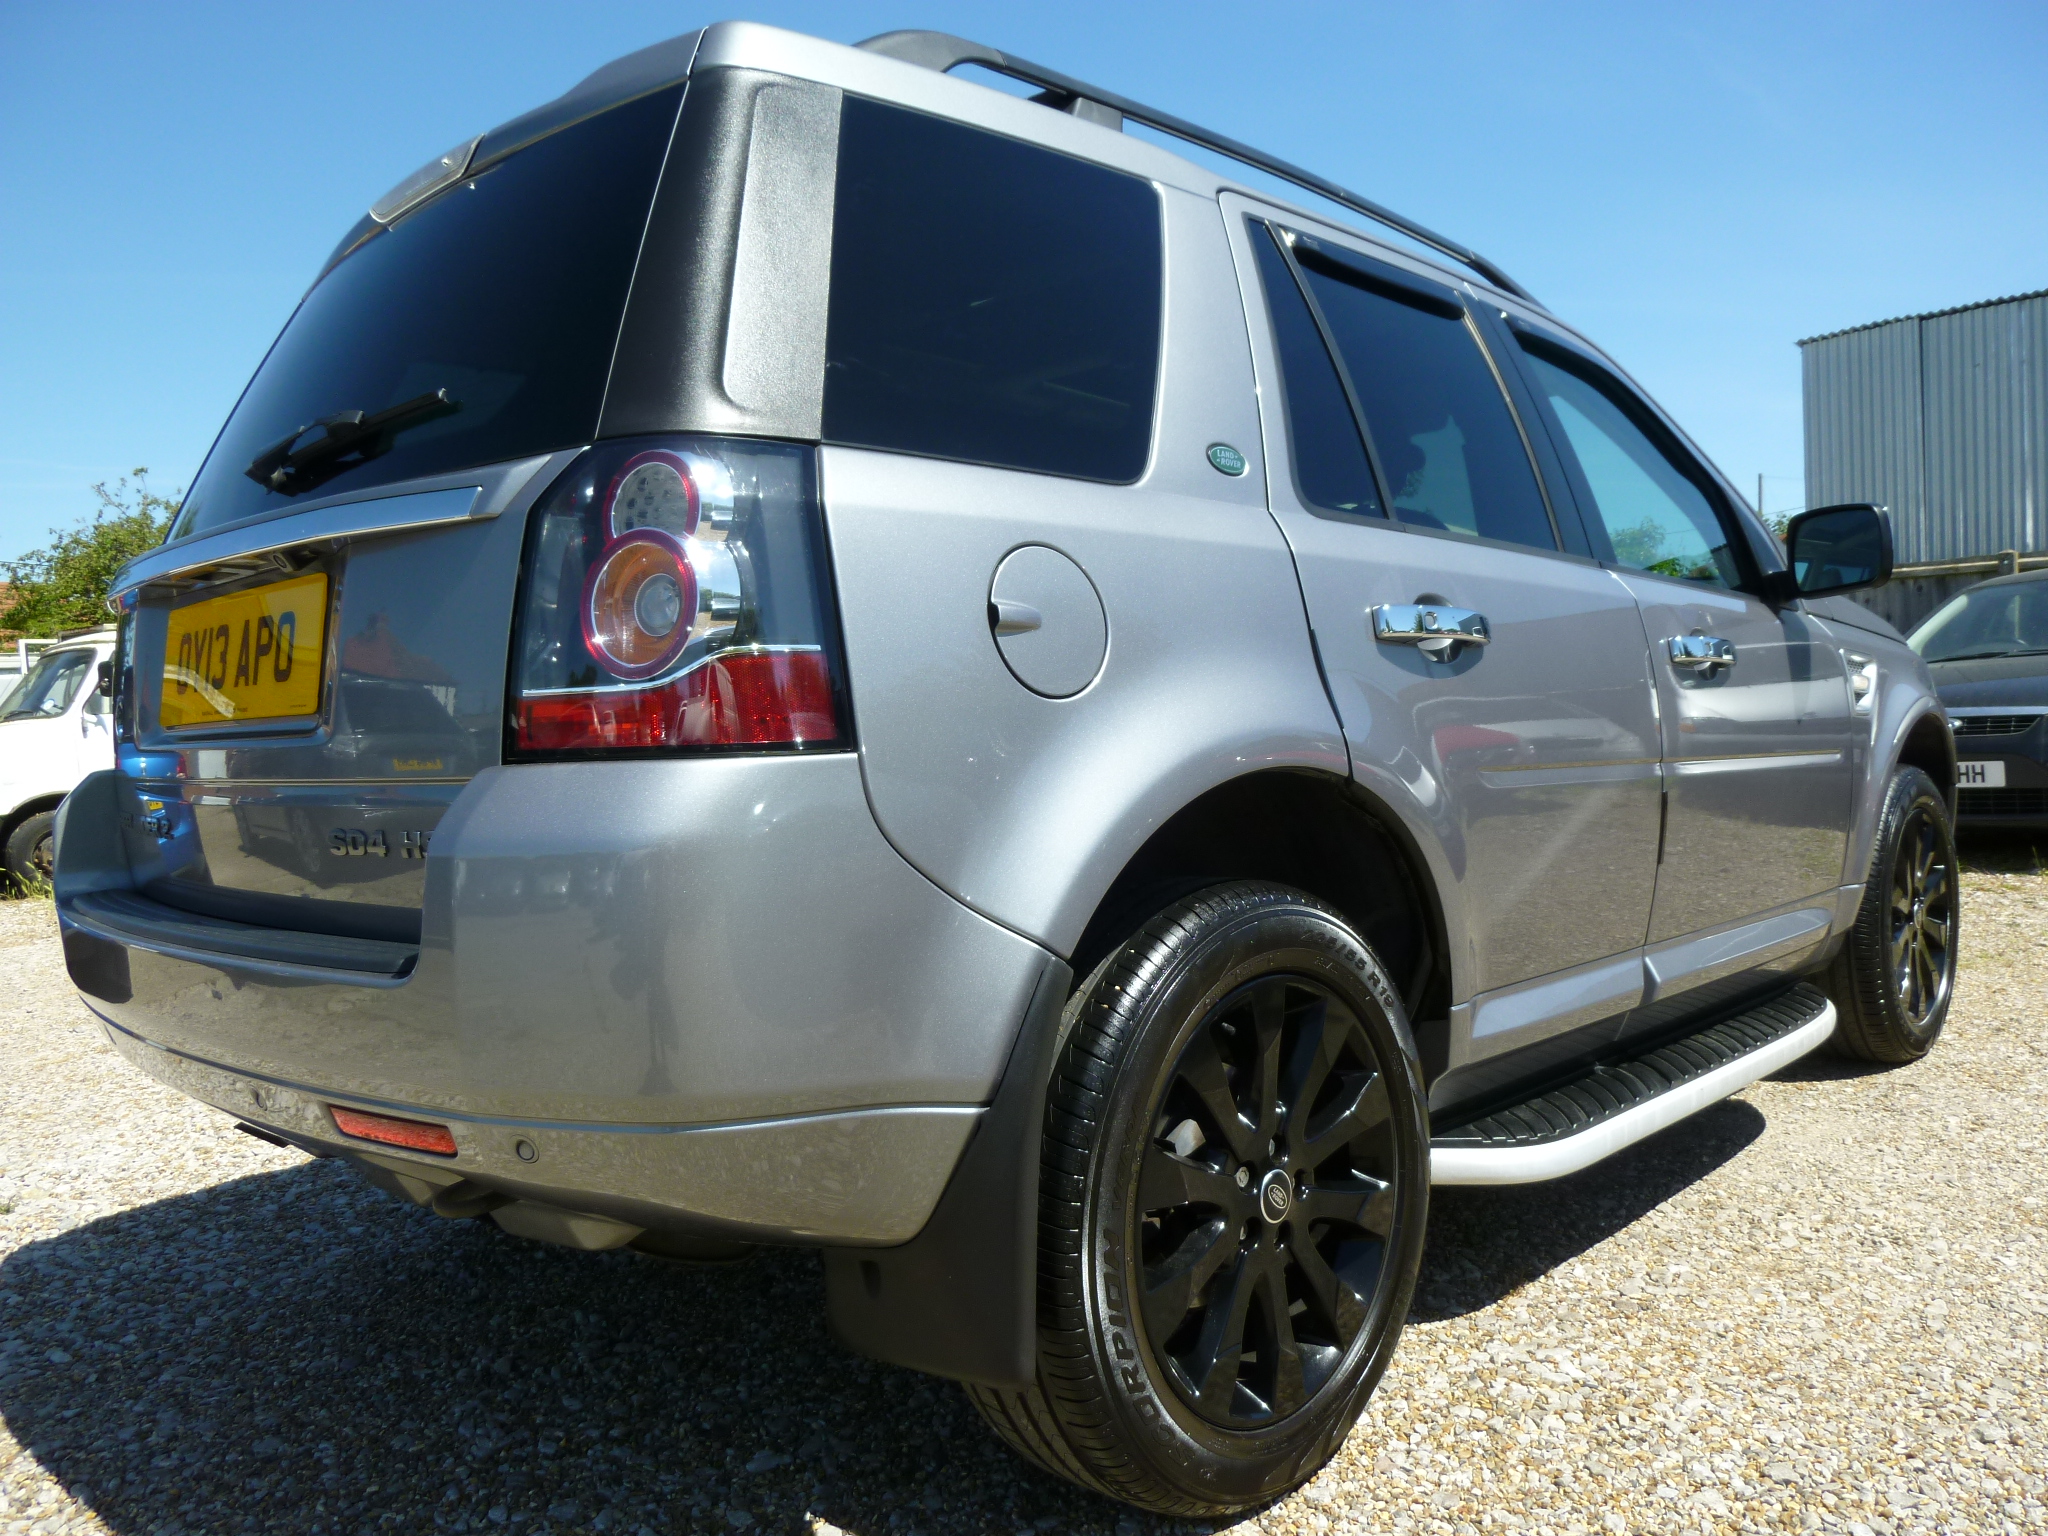 First Drive : Land Rover Freelander SD4 HSE Lux - AROnline